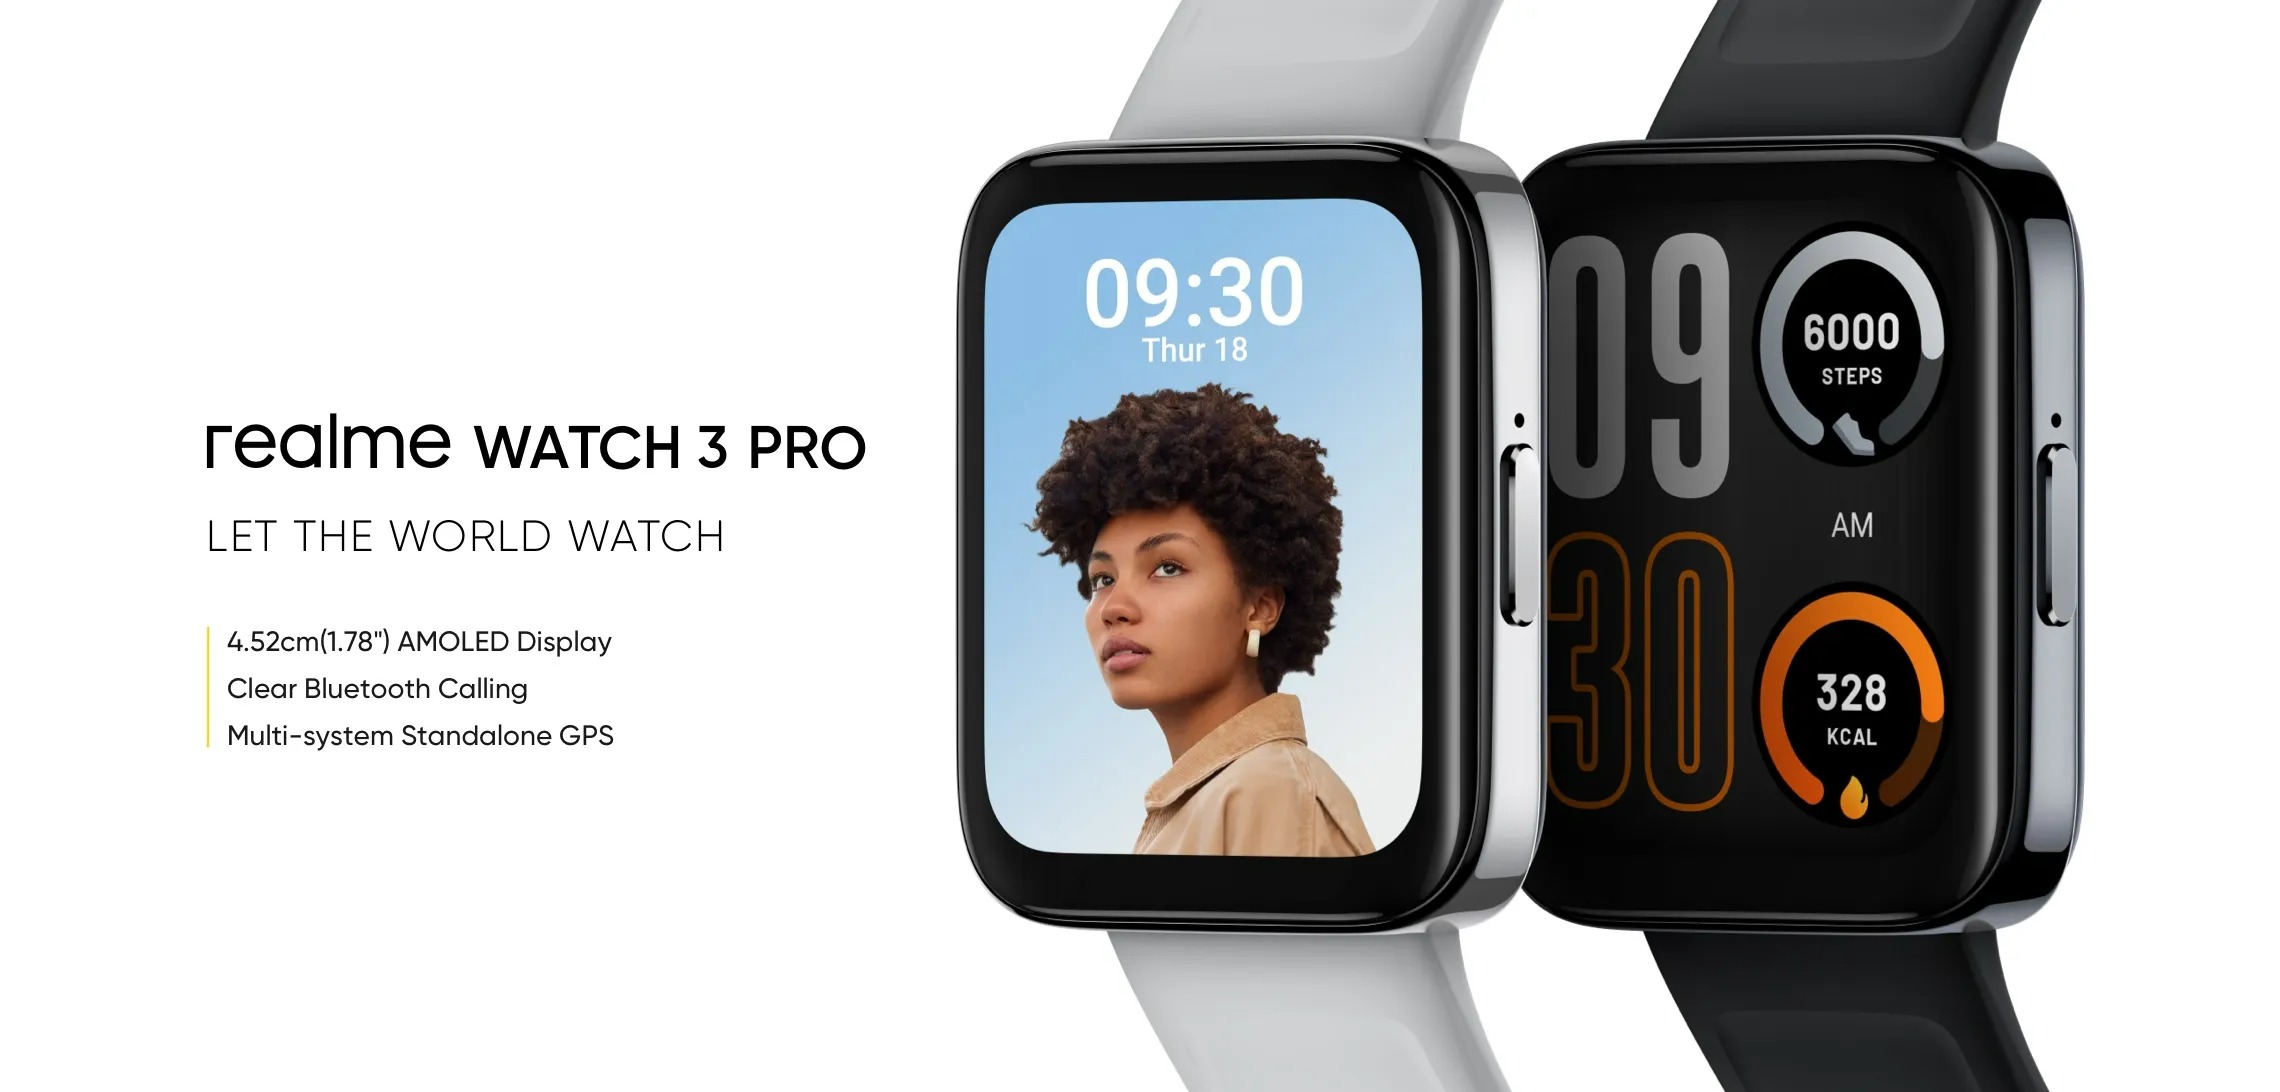 realme c33, realme watch 3 pro and realme buds air 3s launched in india